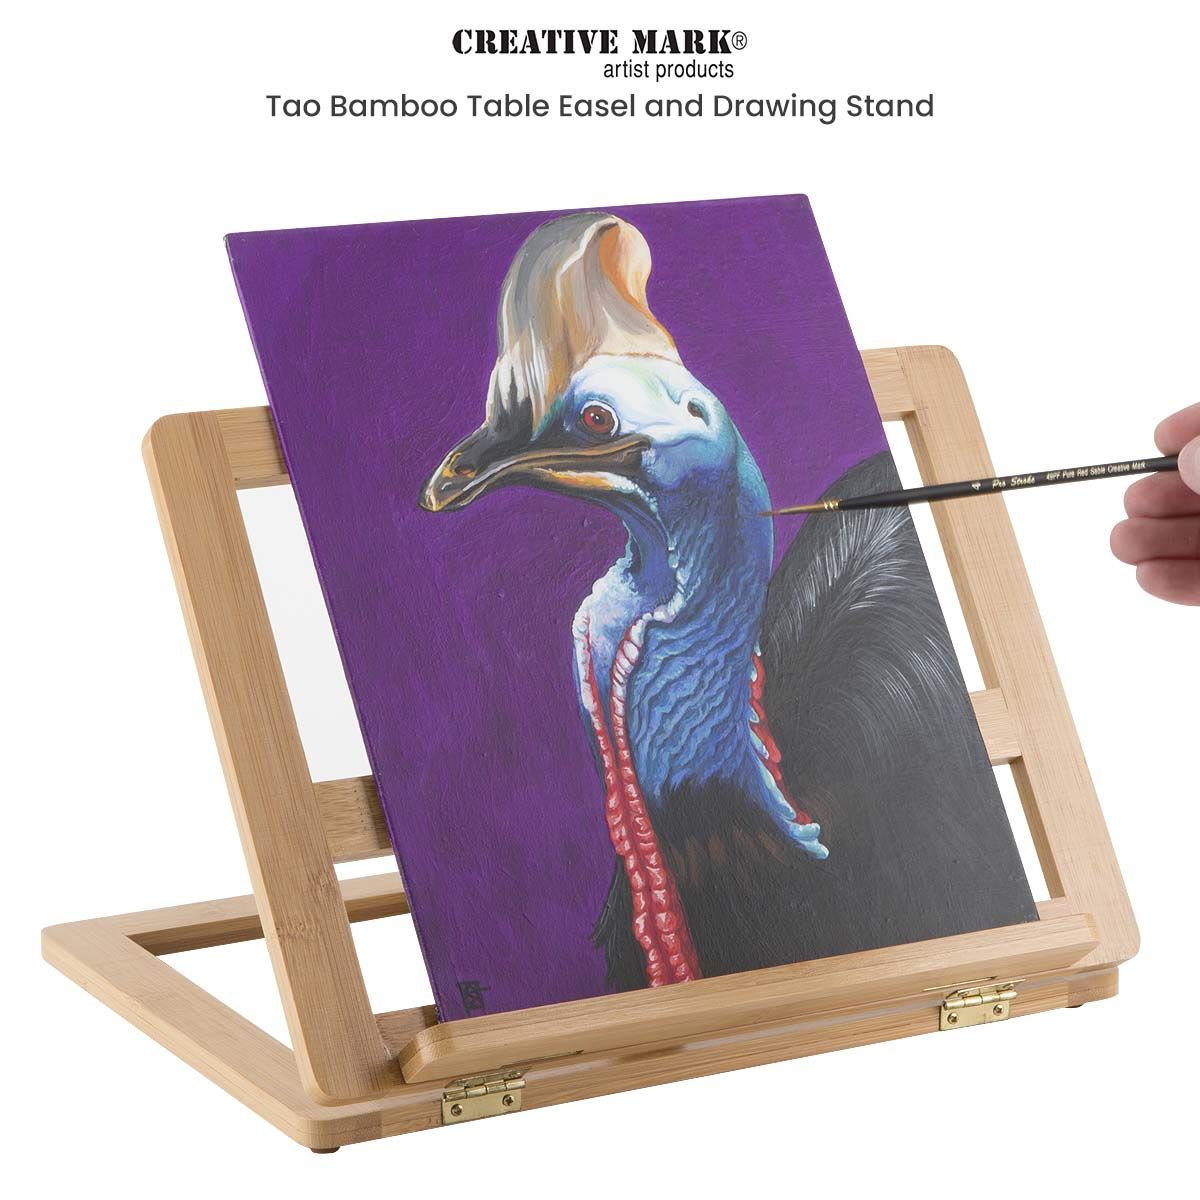 Standholder Desk Easel Cell Stand Accessories Desk Painting Tentacle Mini Wooden Easels Wood tableDisplay Easel Brush